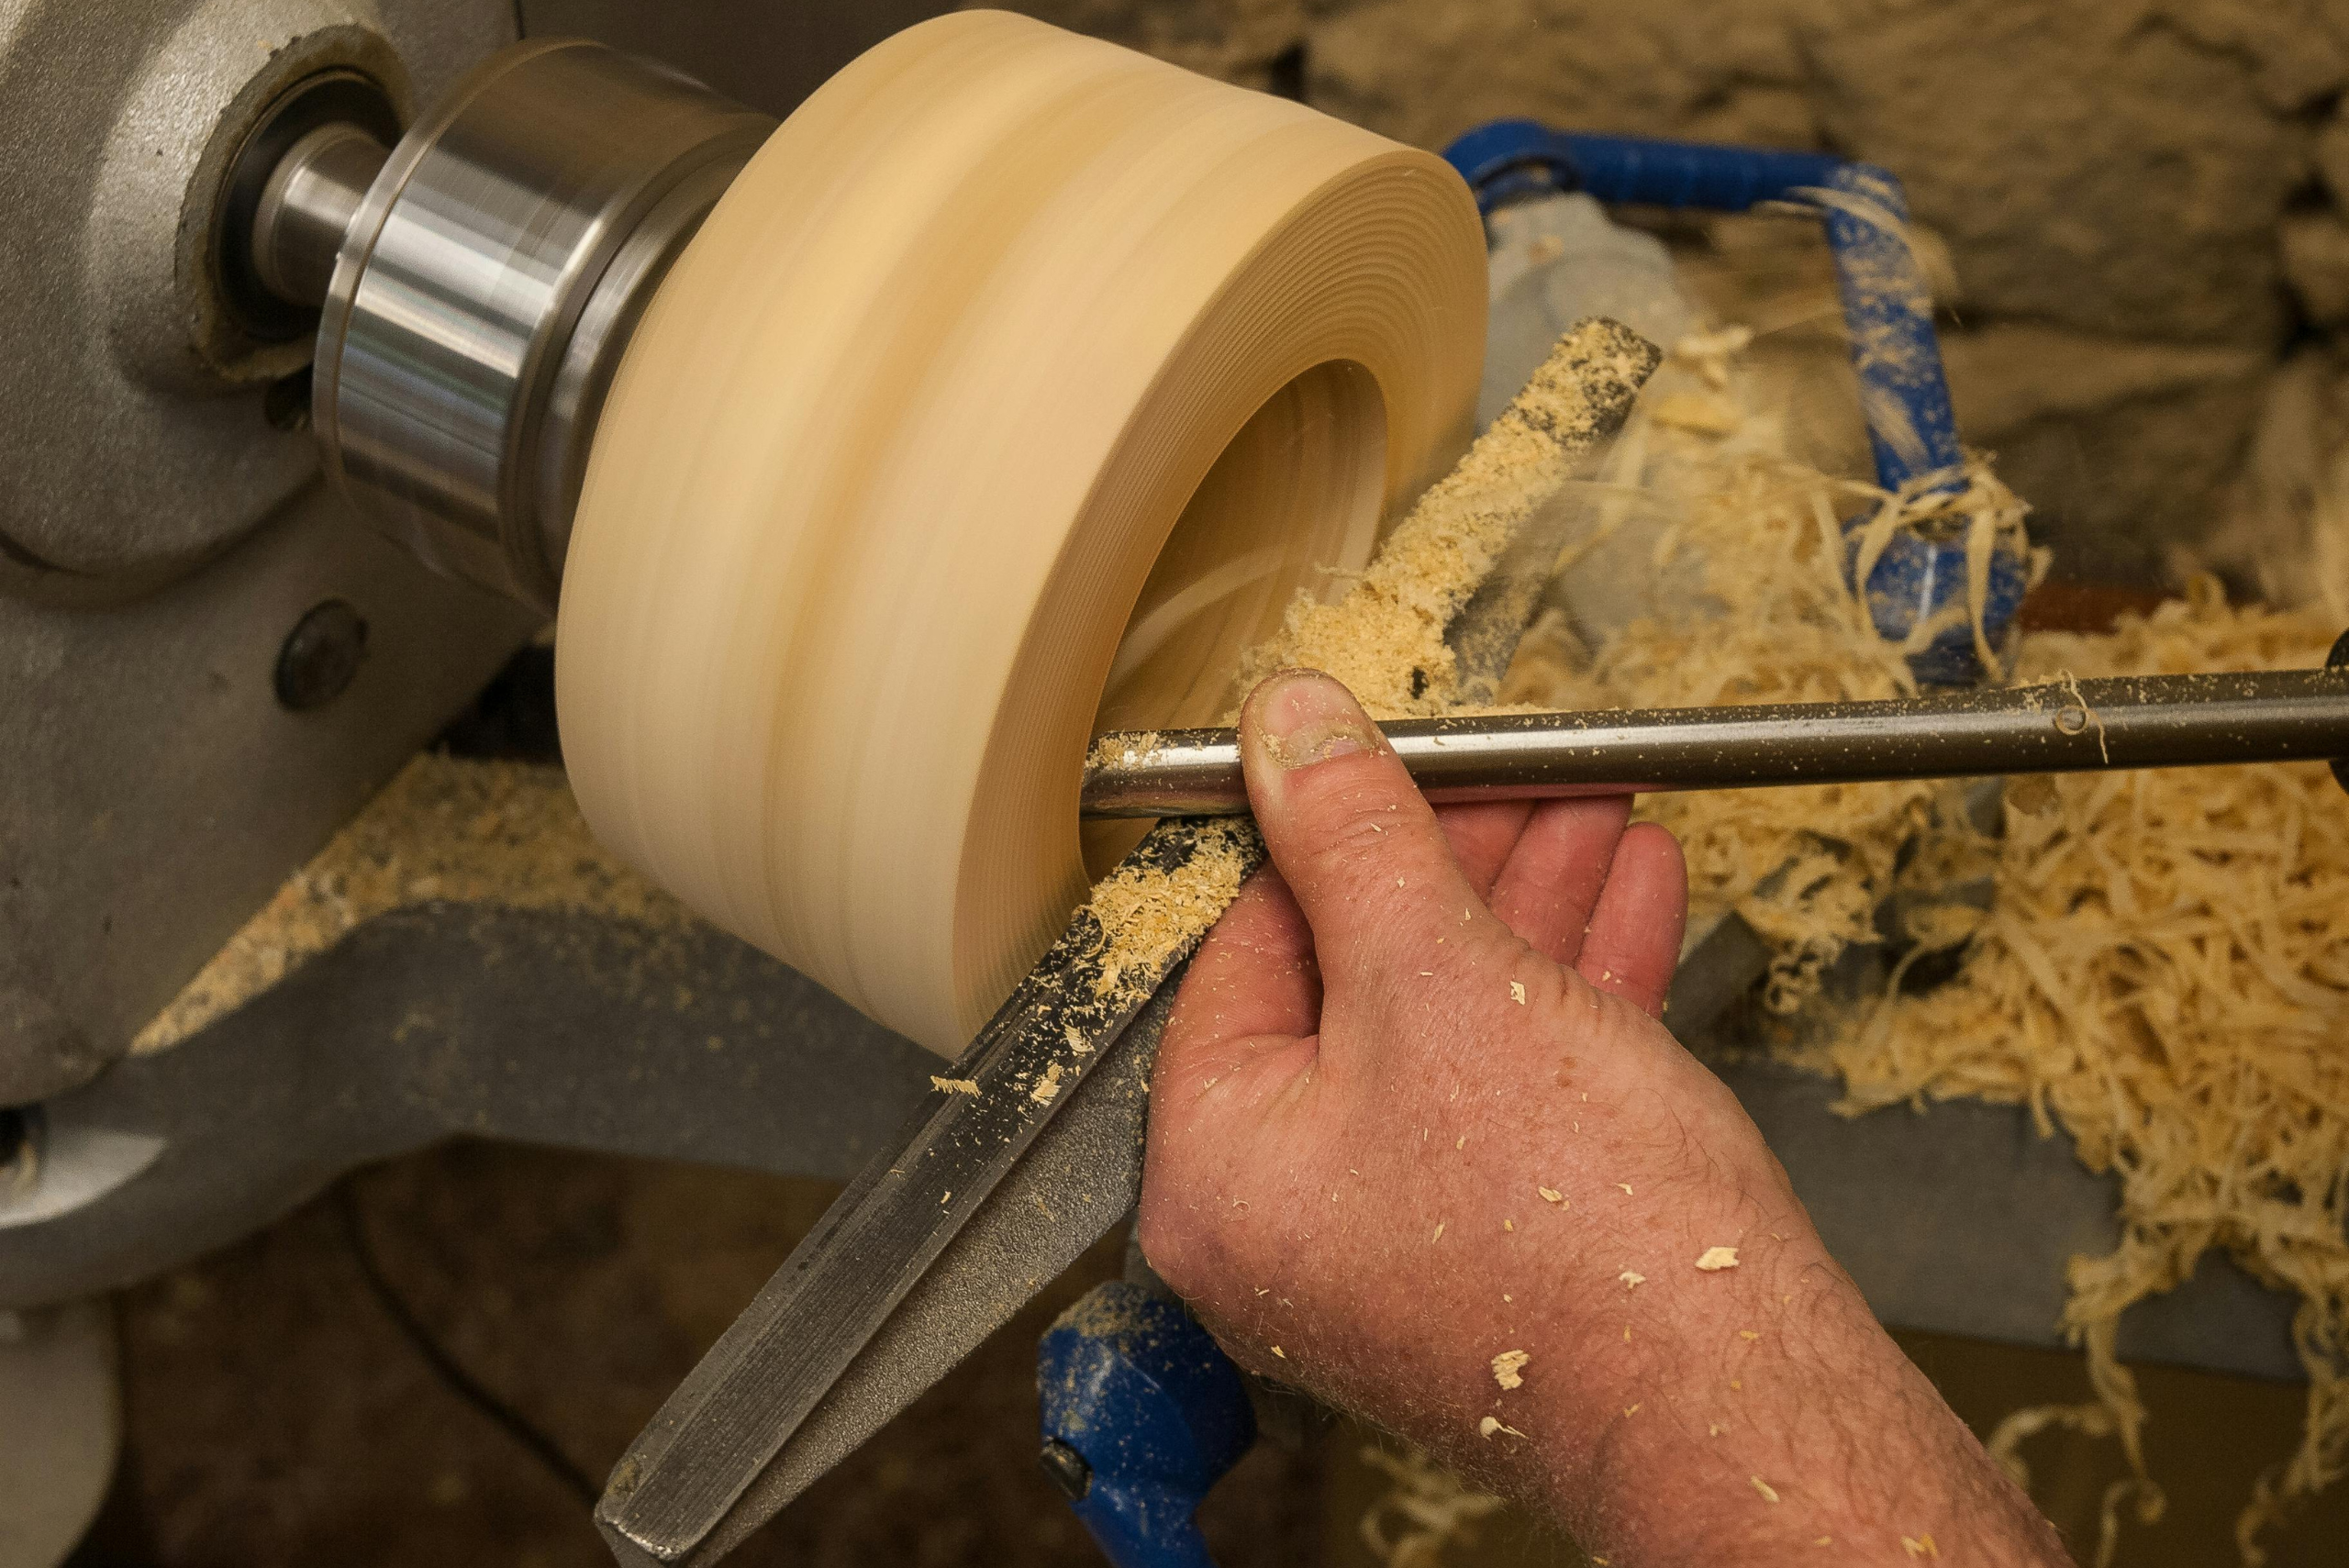 A person using a lathe for woodturning a piece of wood.